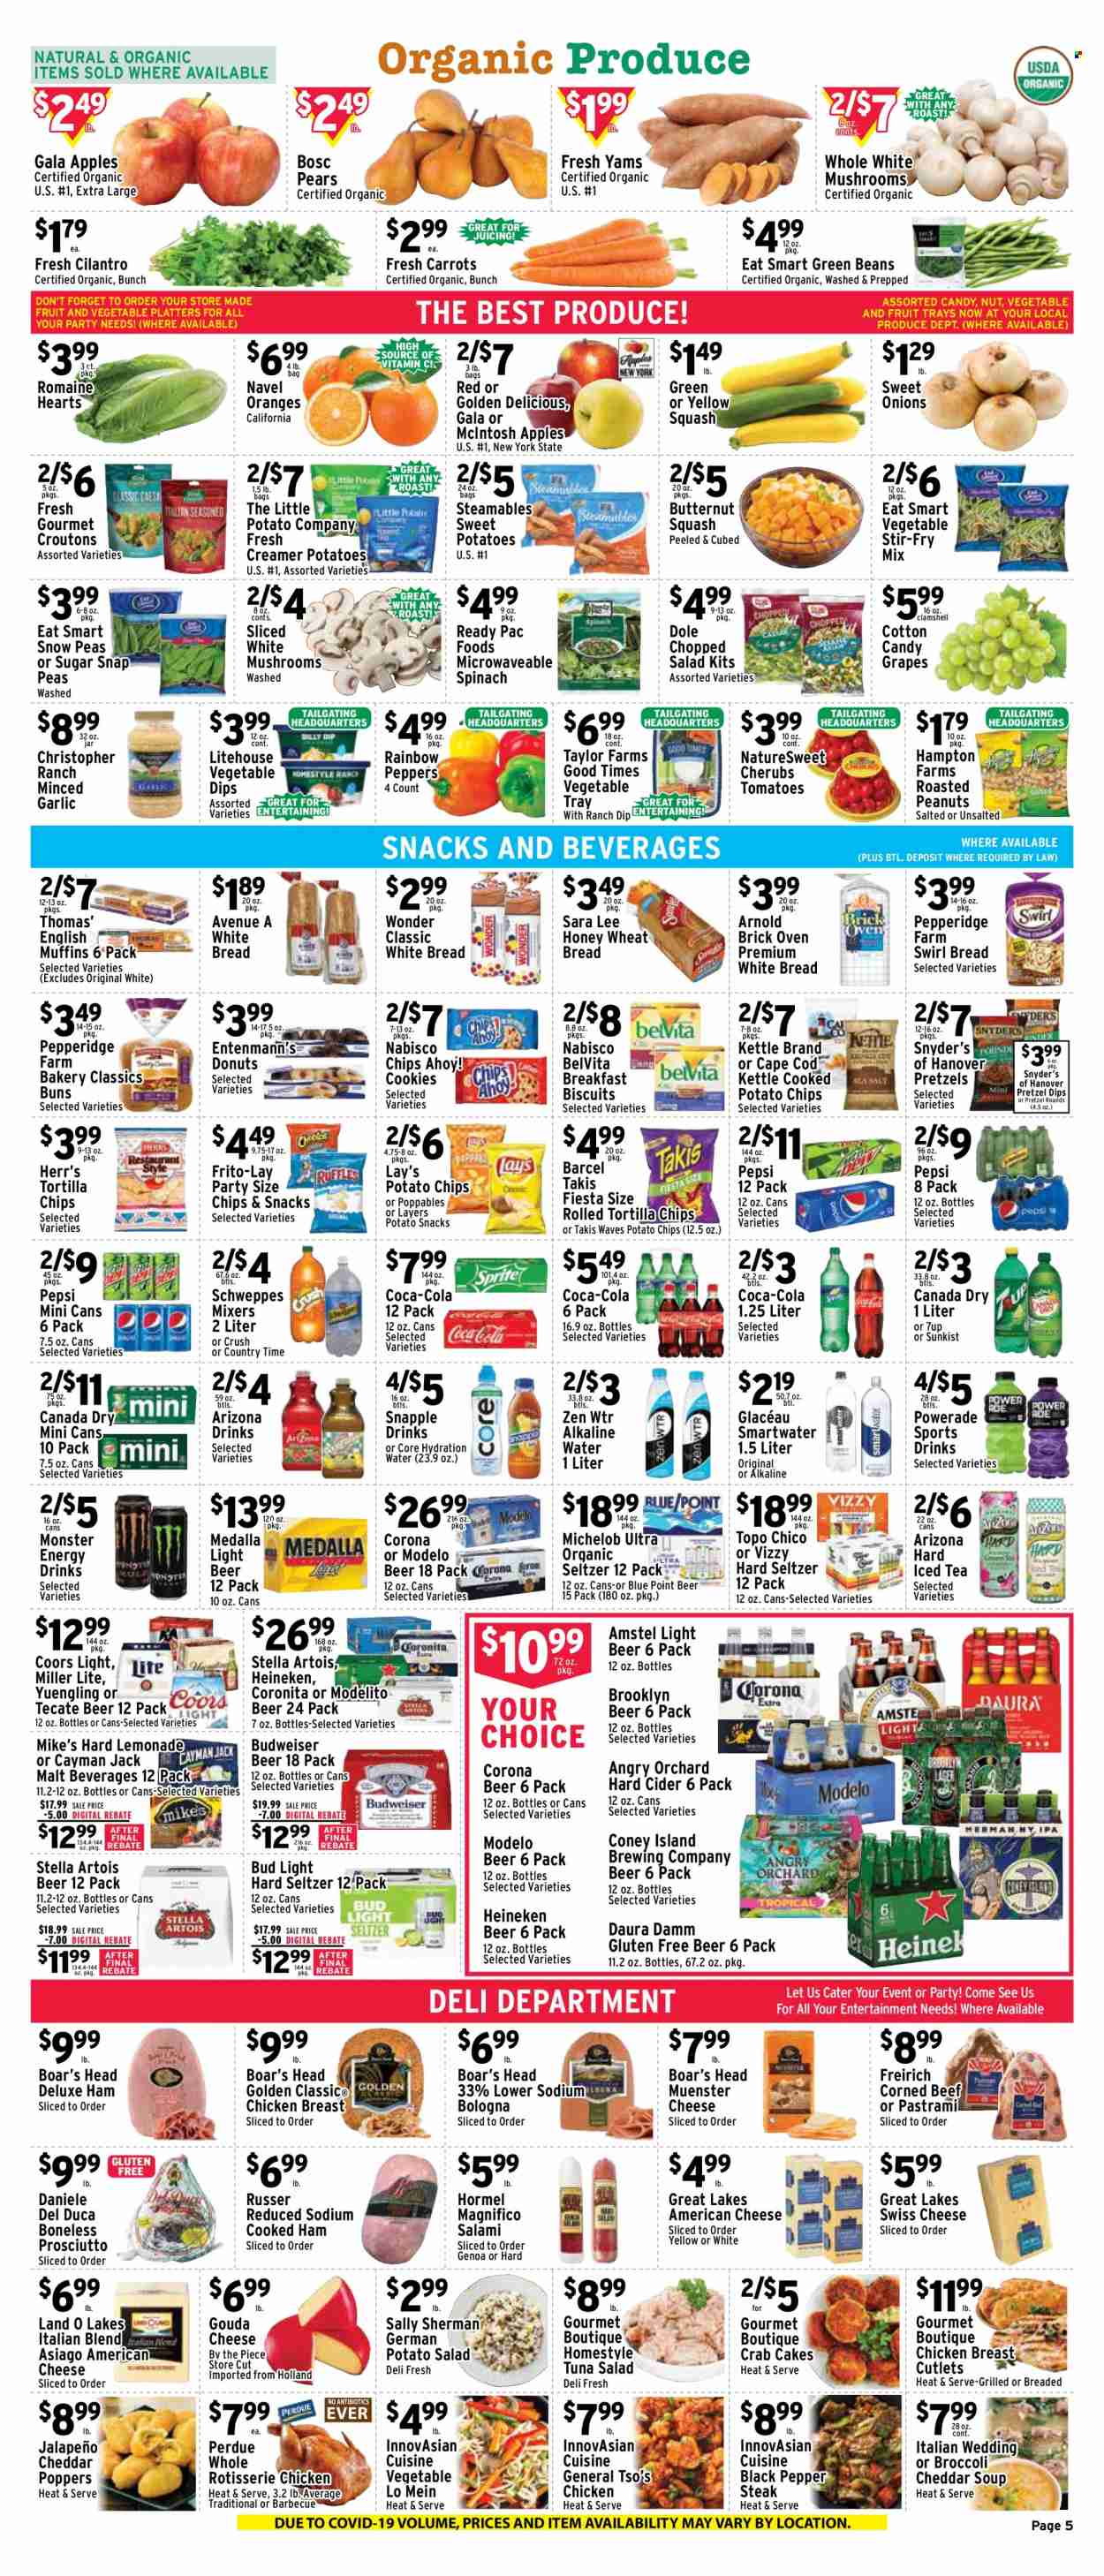 thumbnail - Met Foodmarkets Flyer - 01/29/2023 - 02/04/2023 - Sales products - mushrooms, english muffins, wheat bread, white bread, pretzels, buns, Sara Lee, donut, Entenmann's, beans, broccoli, carrots, green beans, sweet potato, tomatoes, peas, salad, Dole, peppers, jalapeño, chopped salad, yellow squash, apples, Gala, grapes, pears, oranges, Golden Delicious, cod, tuna, crab cake, chicken roast, soup, Perdue®, Ready Pac, Hormel, cooked ham, salami, ham, prosciutto, bologna sausage, potato salad, tuna salad, corned beef, american cheese, asiago, gouda, swiss cheese, cheese, Münster cheese, dip, snap peas, snow peas, cookies, snack, cotton candy, biscuit, Chips Ahoy!, tortilla chips, potato chips, chips, Lay’s, Frito-Lay, croutons, malt, belVita, cilantro, black pepper, roasted peanuts, peanuts, Canada Dry, lemonade, Schweppes, Sprite, Powerade, Pepsi, energy drink, Monster, ice tea, 7UP, Monster Energy, AriZona, Snapple, Country Time, Smartwater, alkaline water, Hard Seltzer, cider, beer, Stella Artois, Bud Light, Corona Extra, Heineken, IPA, Modelo, beef meat, steak, Brooklyn Beer, Budweiser, butternut squash, Miller Lite, Coors, Yuengling, Michelob, navel oranges. Page 5.